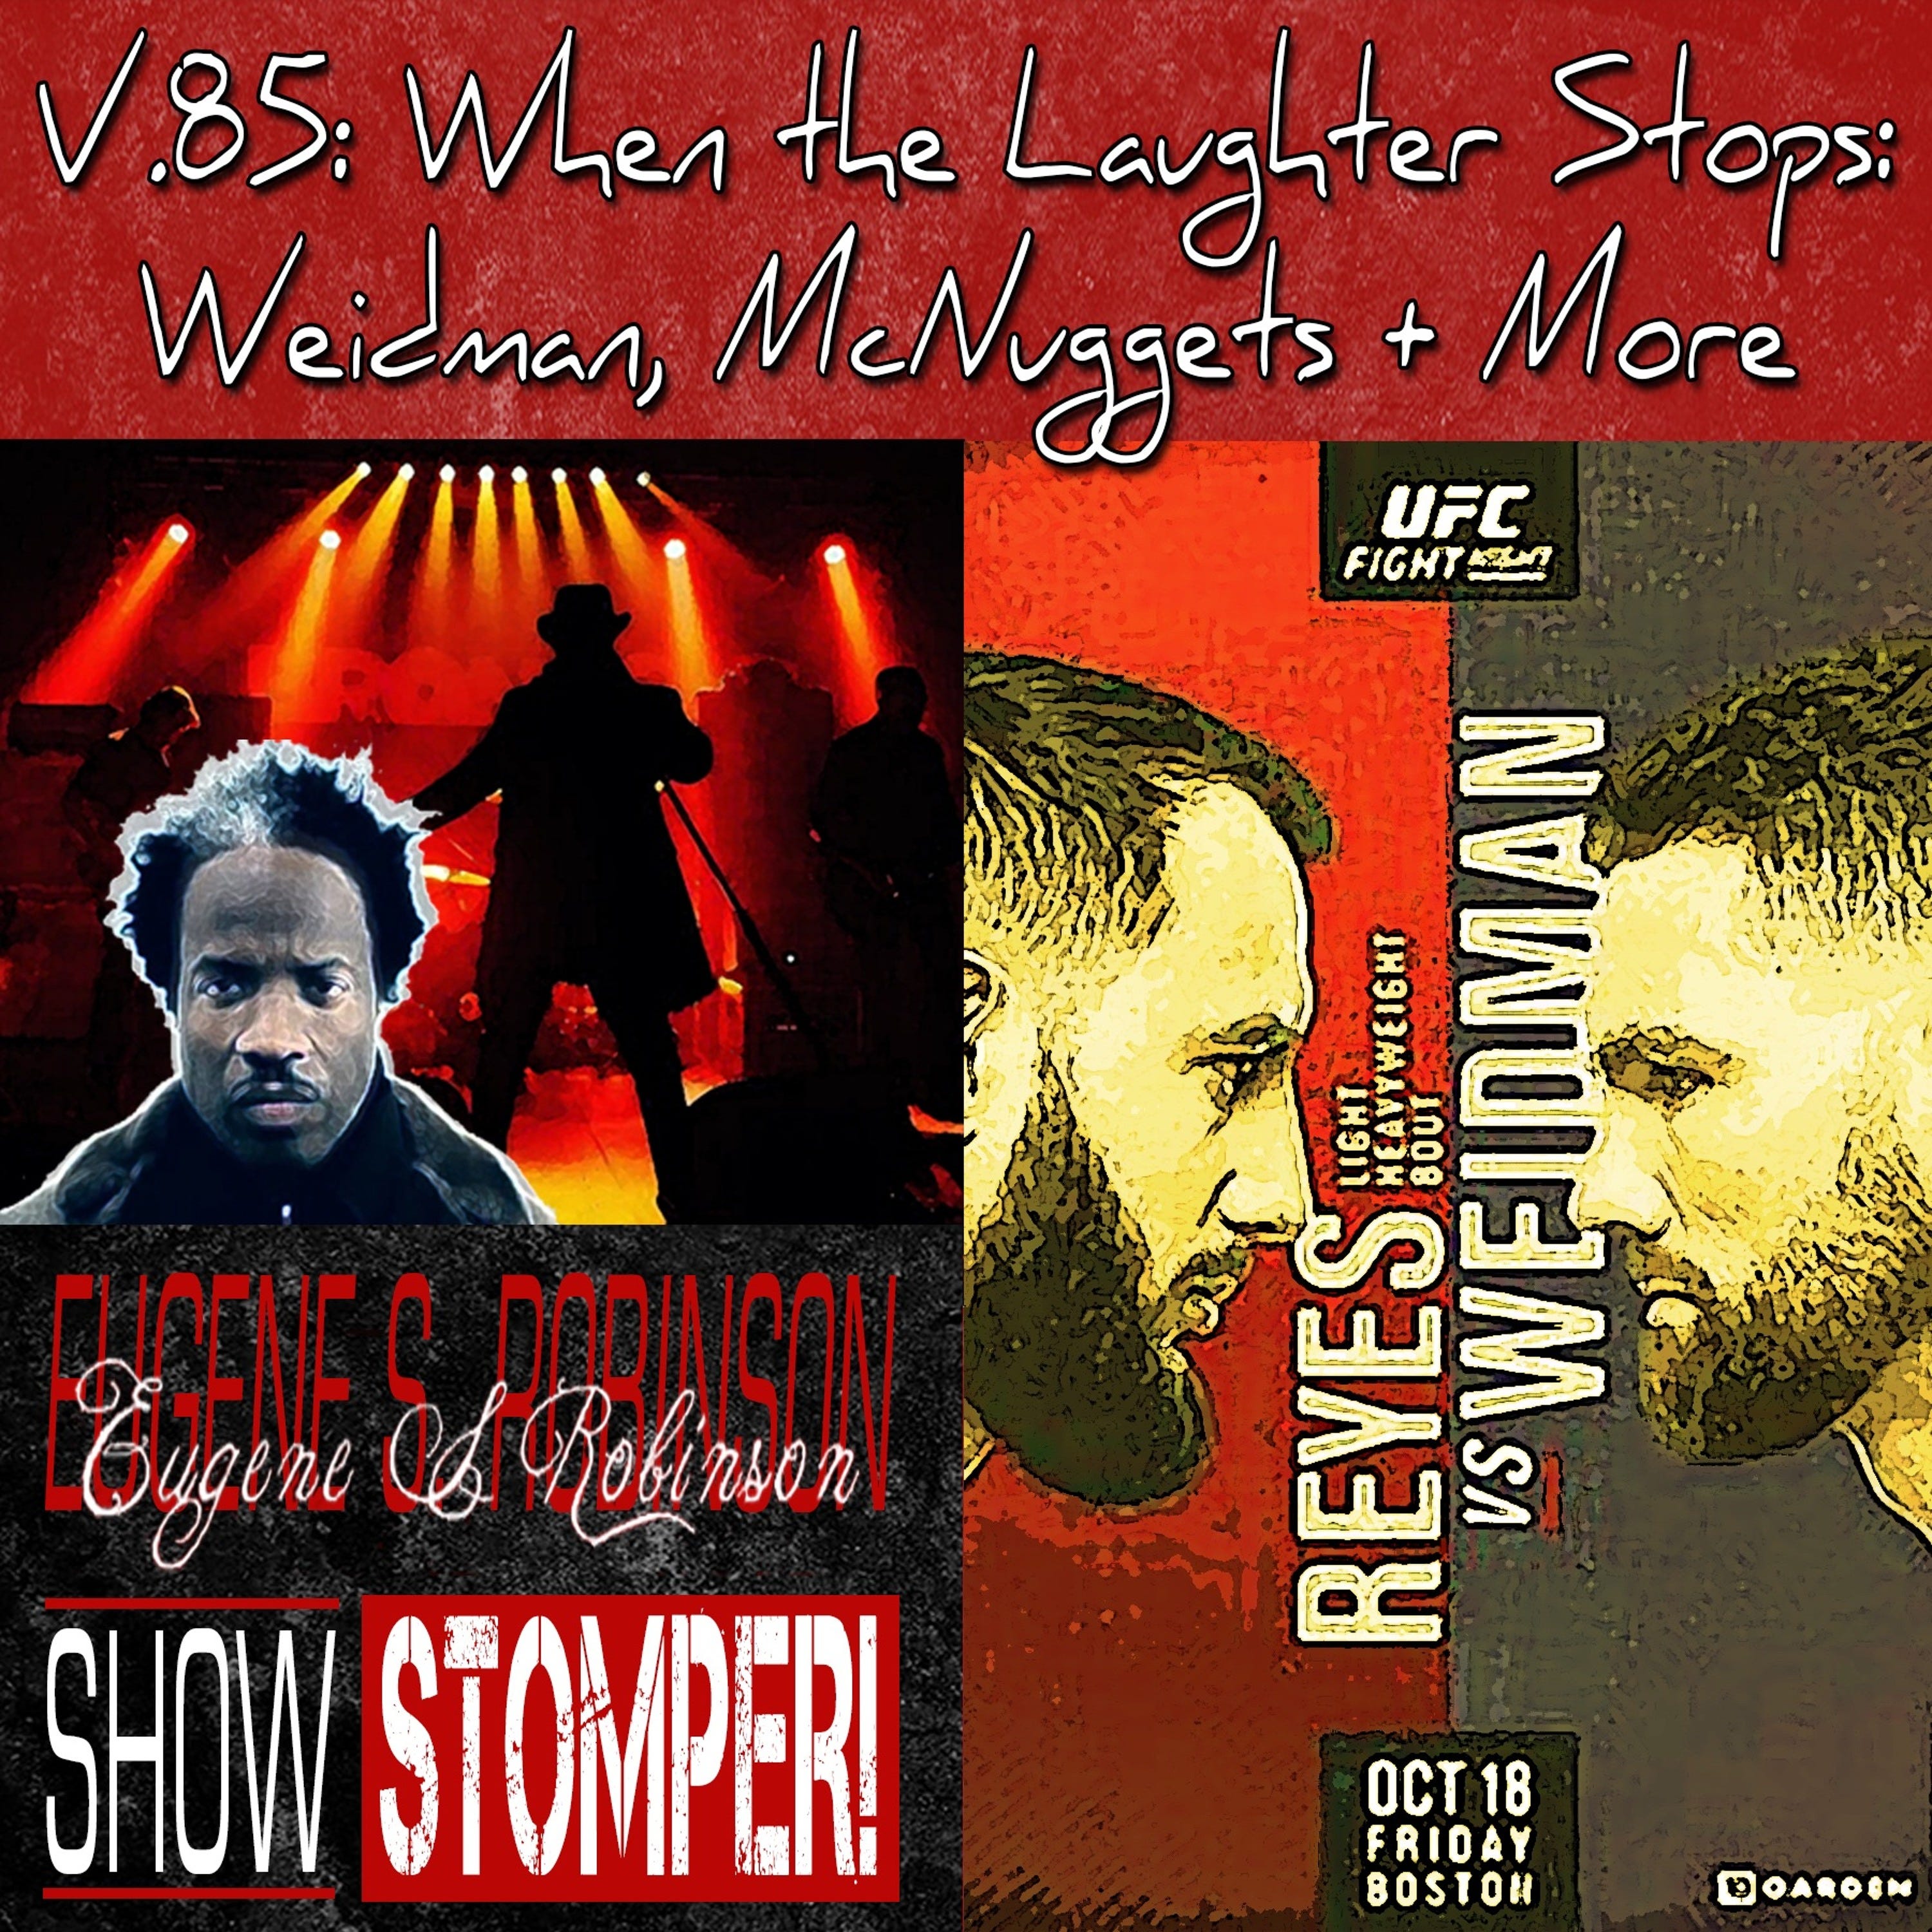 V.85 When The Laughter Stops Weidman McNuggets + More On The Eugene S. Robinson Show Stomper!